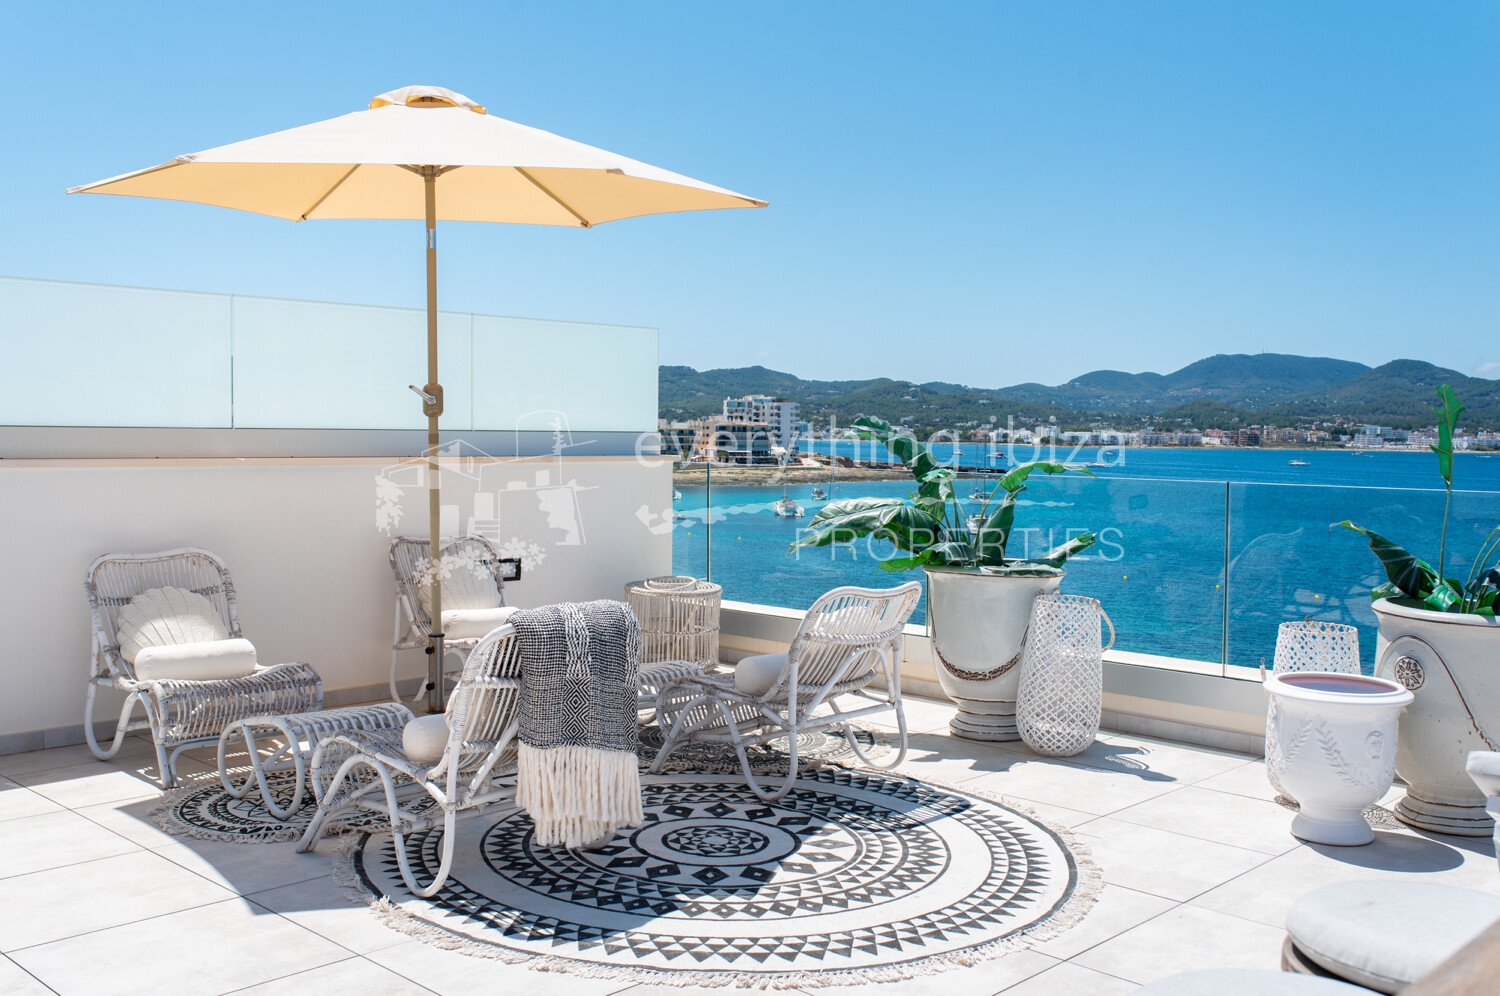 Exquisite Frontline 3 Bed Penthouse with Stunning Sea & Sunset Views, ref. 1725, for sale in Ibiza by everything ibiza Properties